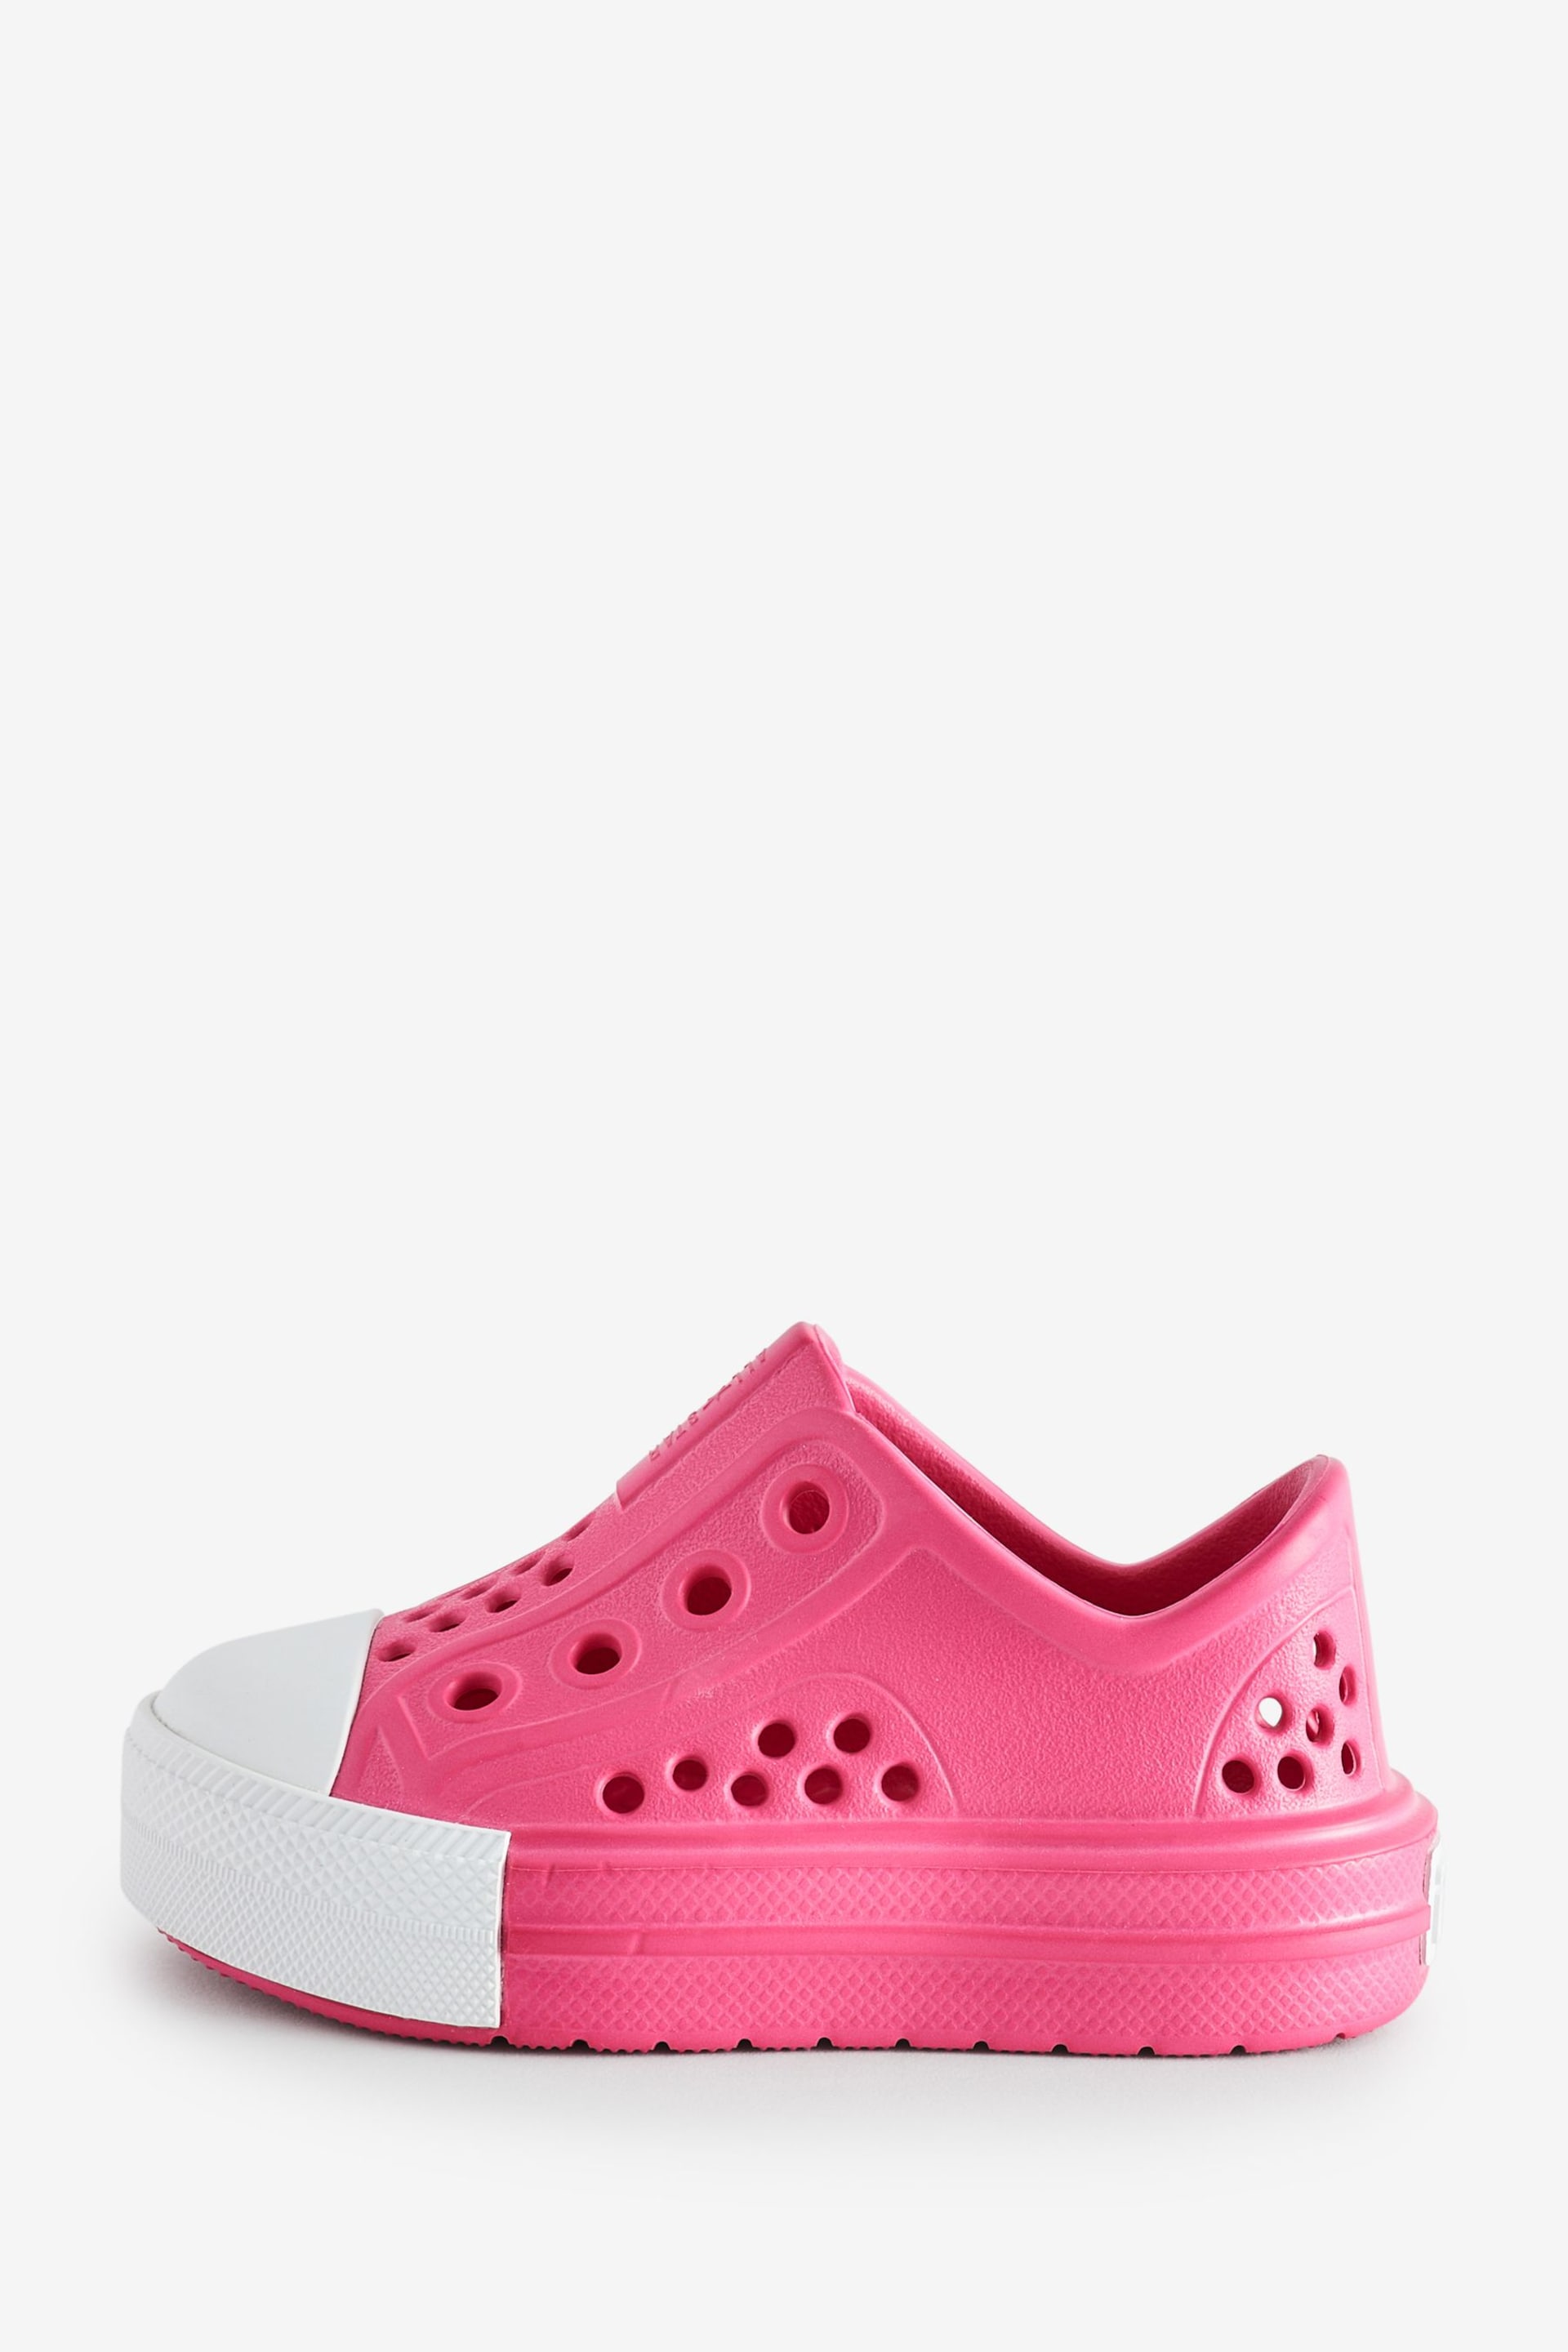 Converse Pink Play Lite Toddler Sandals - Image 2 of 8